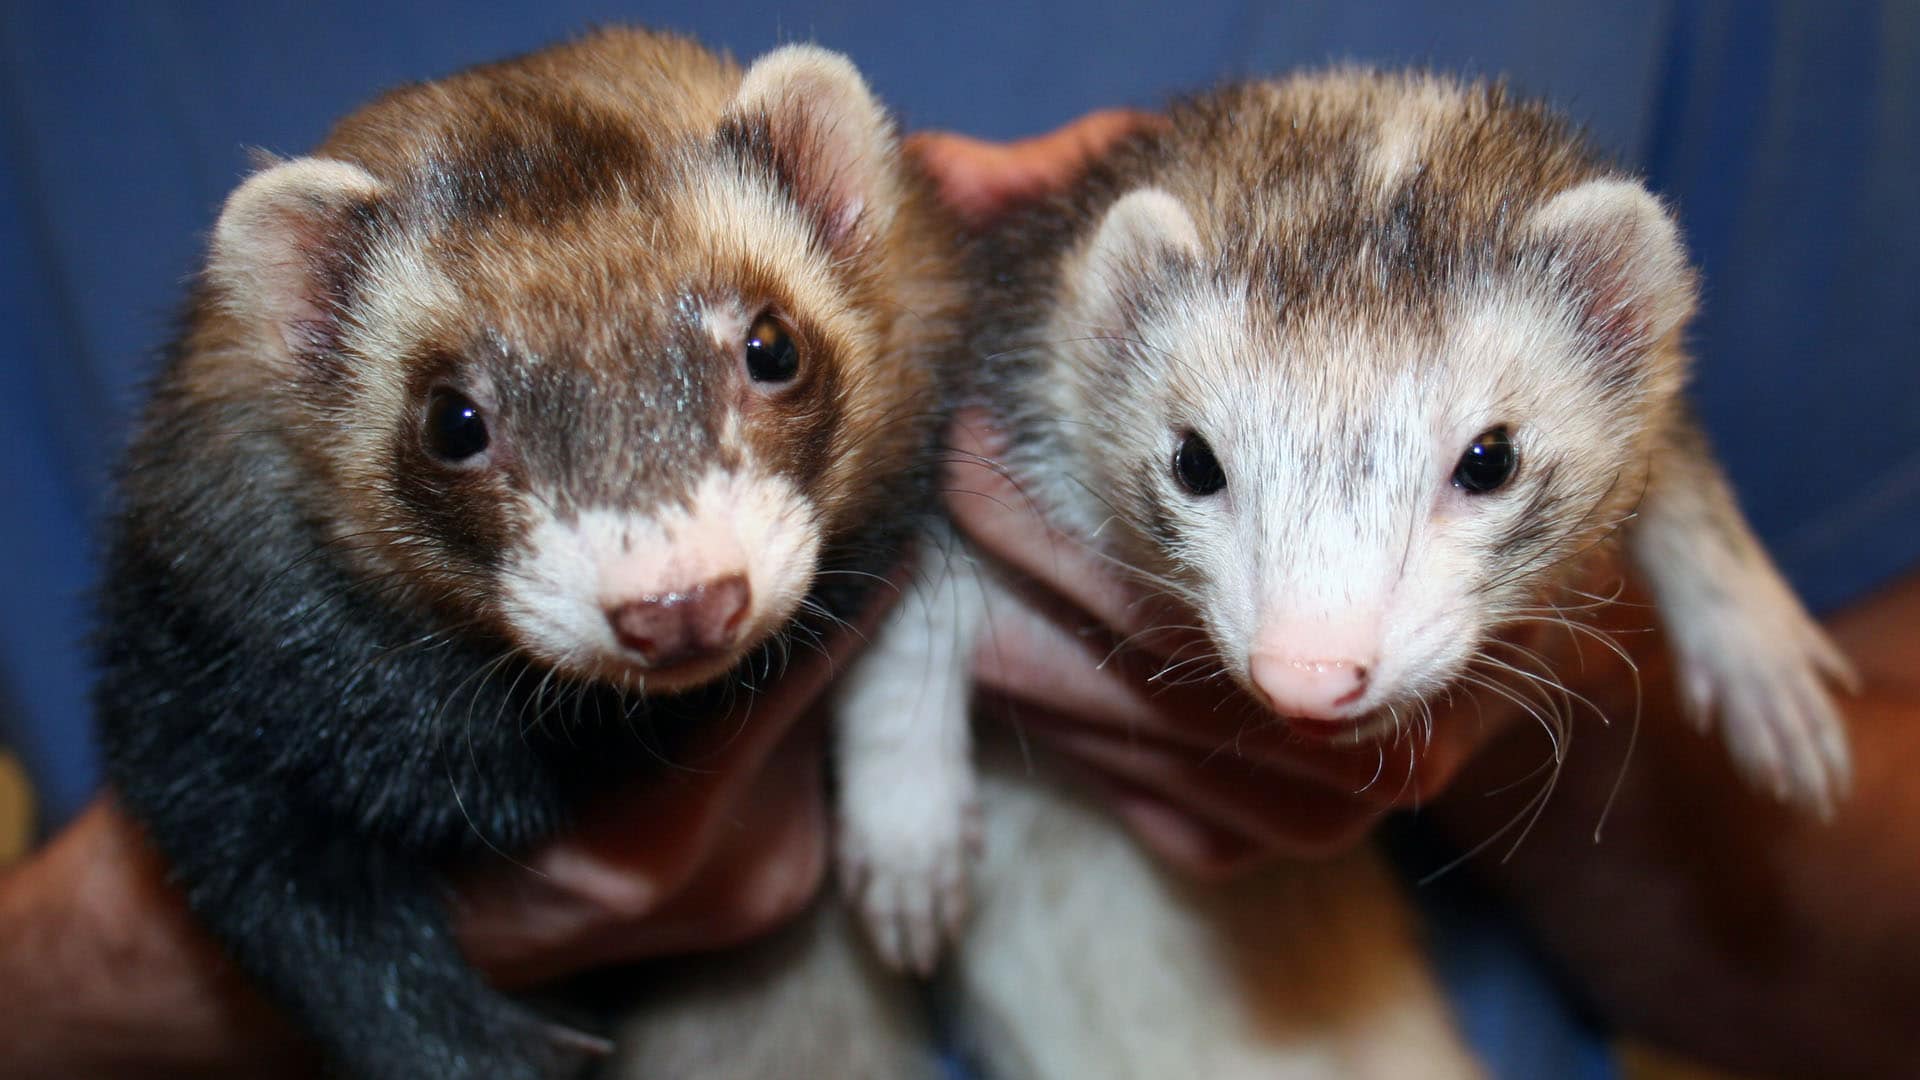 How Ferrets Are Helping Researchers Battle Covid-19